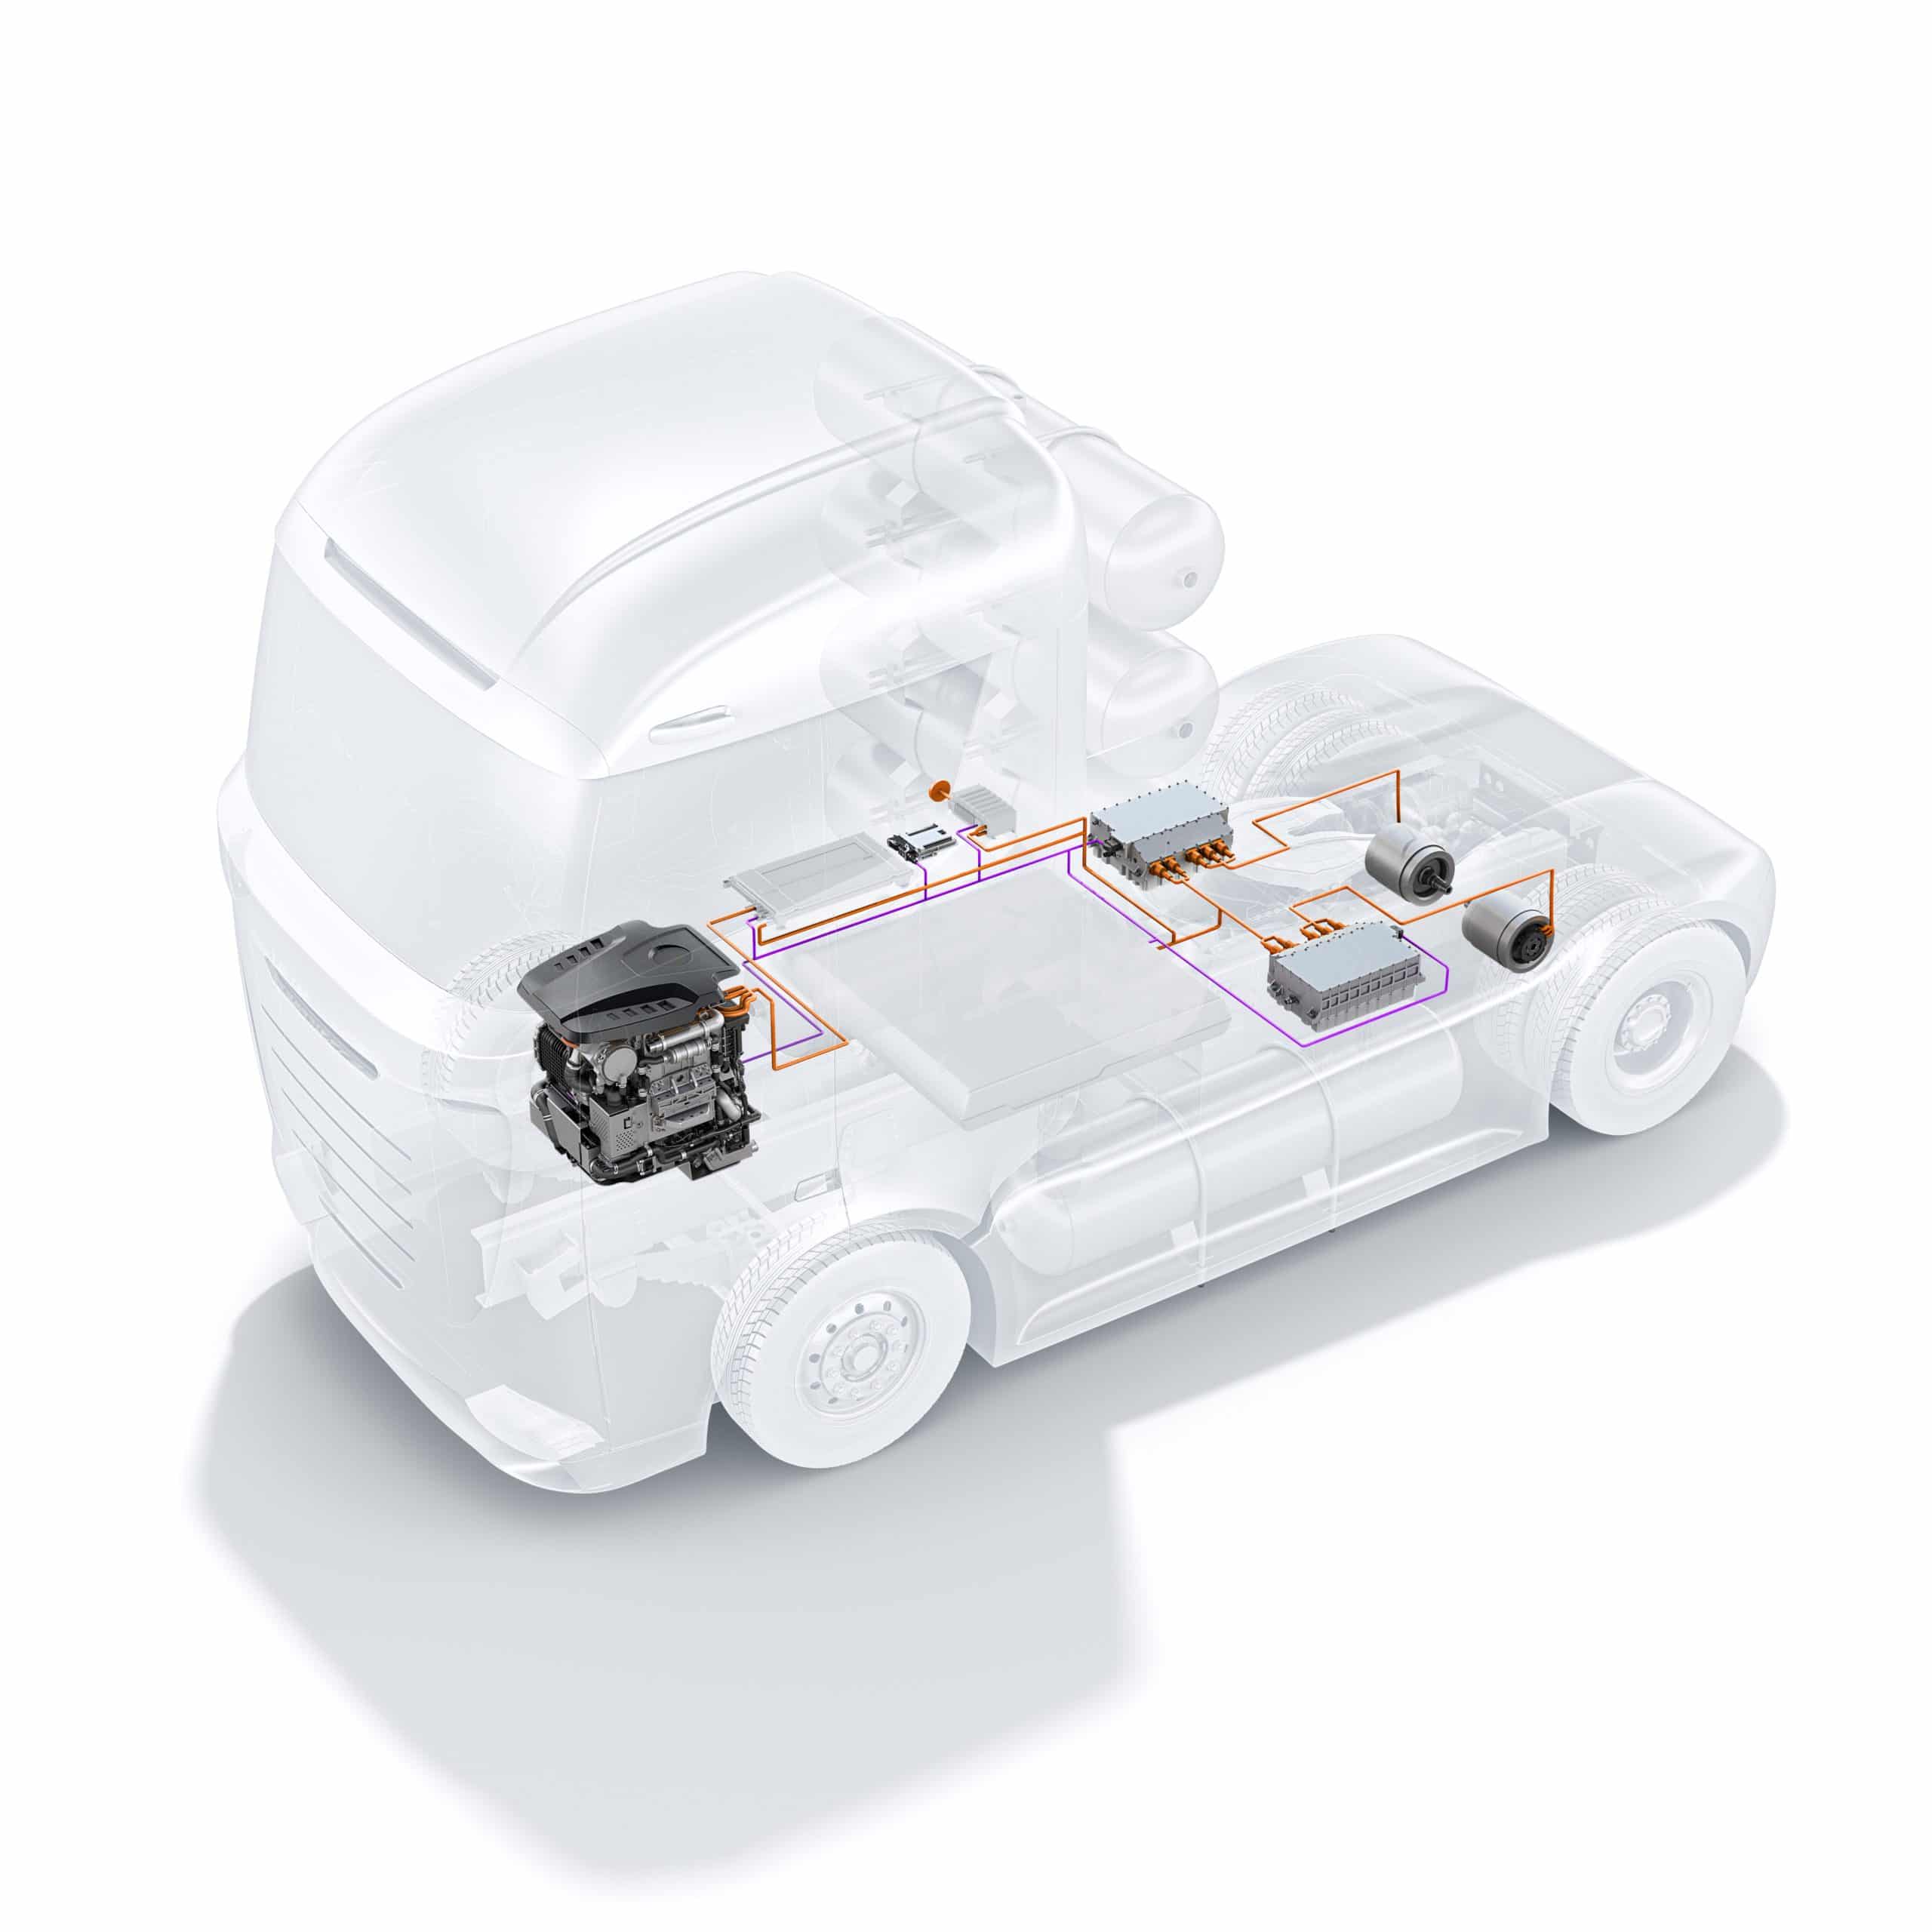 Bosch and Qingling Motors cooperate on fuel cells